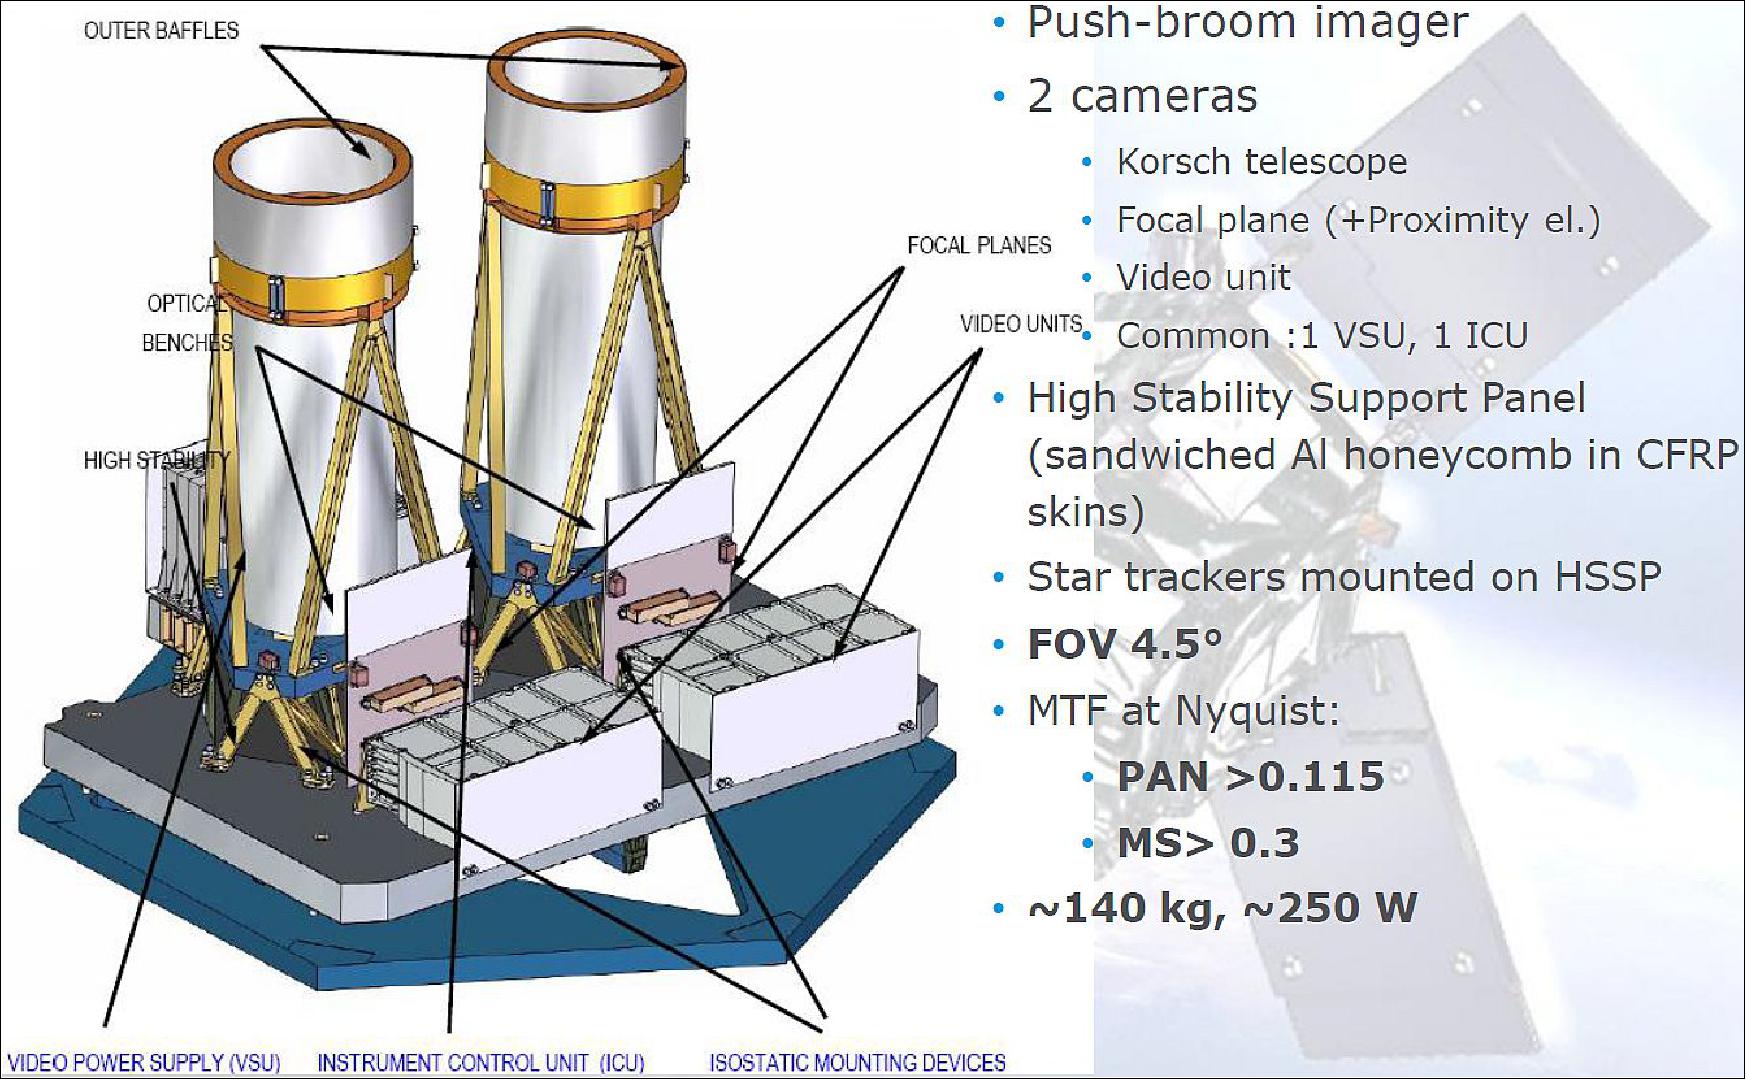 Figure 27: Alternate view of the PP instrument with elements defined (image credit: Sener)